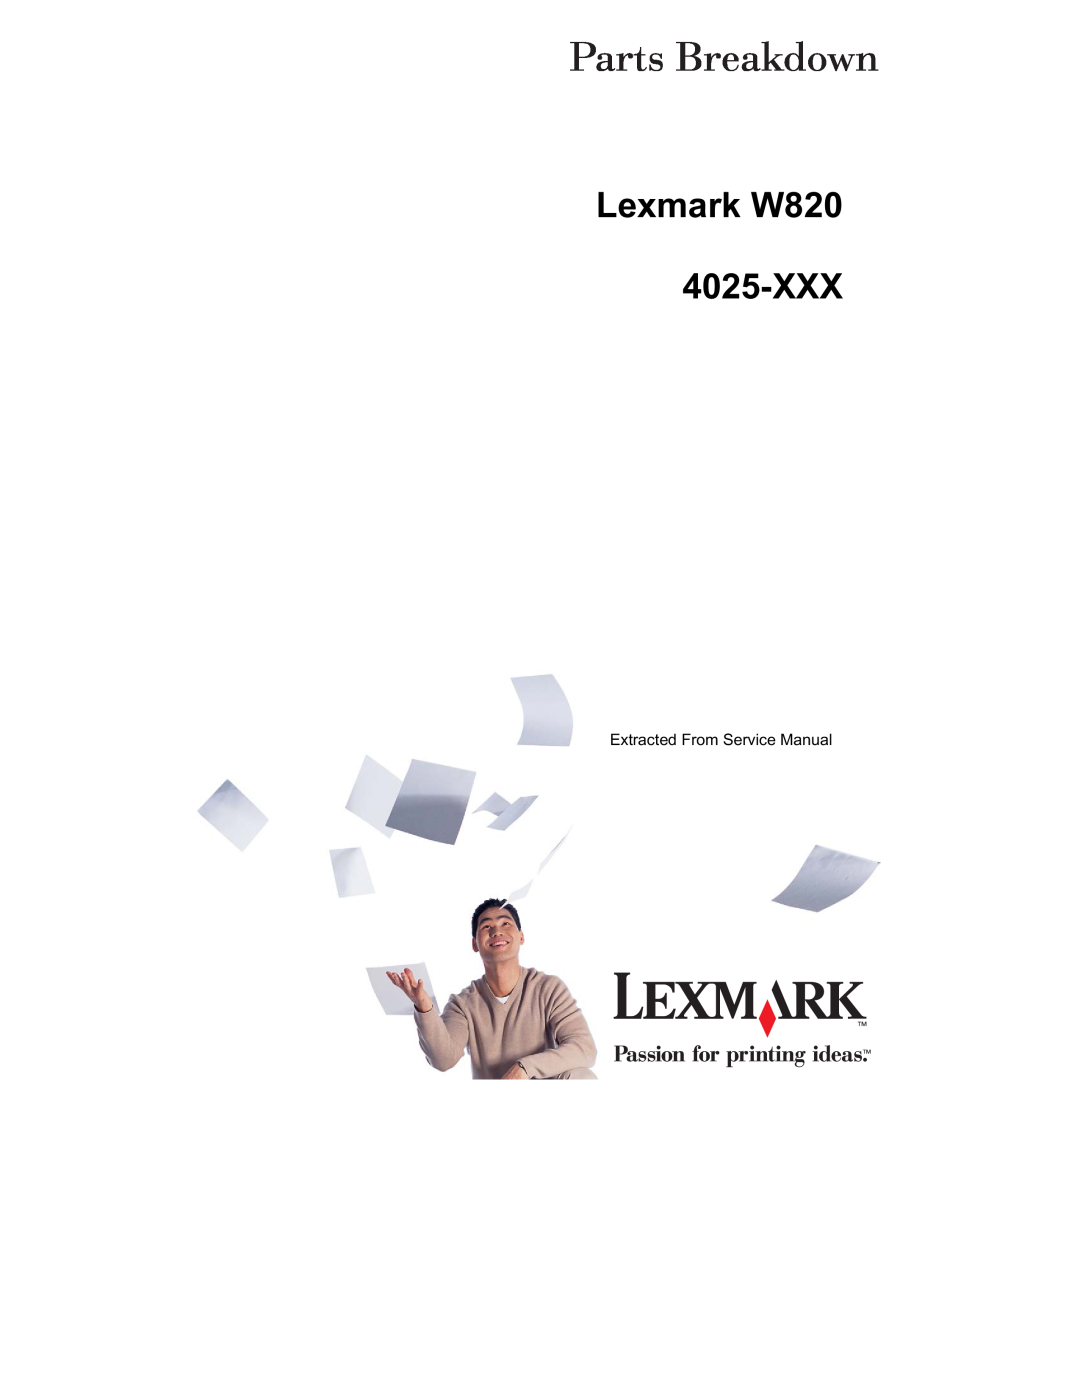 Lexmark W820 manual Preparing for disassembly, Removing the bins, Removing the optional finisher, Administration, Index 